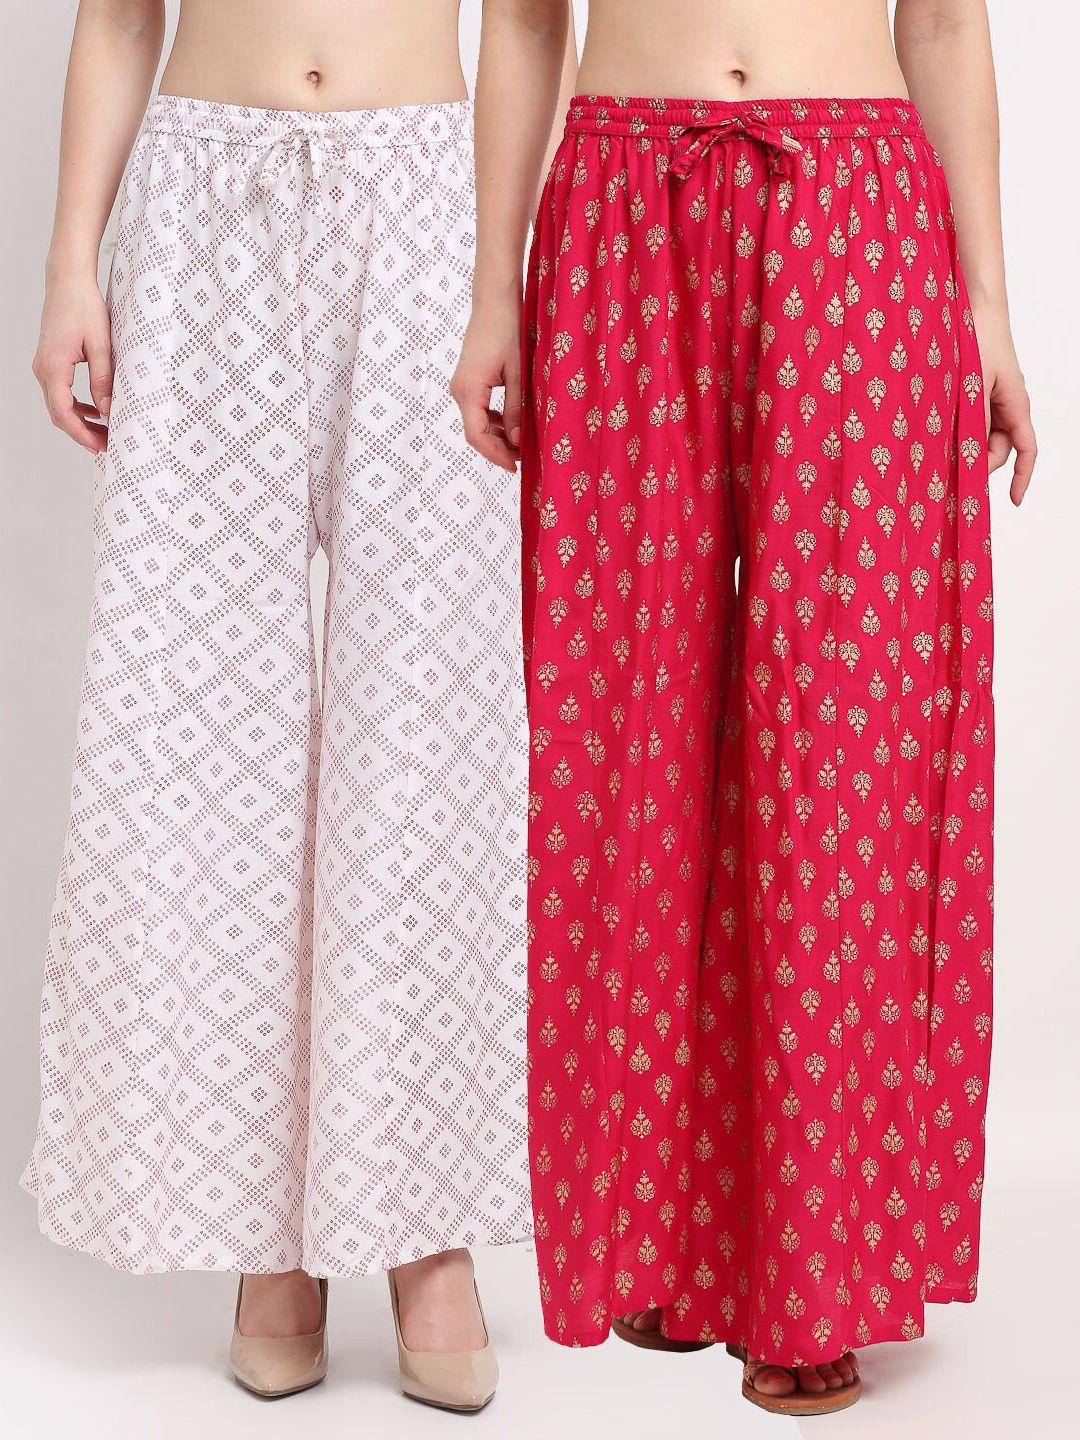 gracit-women-pack-of-2-white-&-pink-printed-flared-knitted-ethnic-palazzos